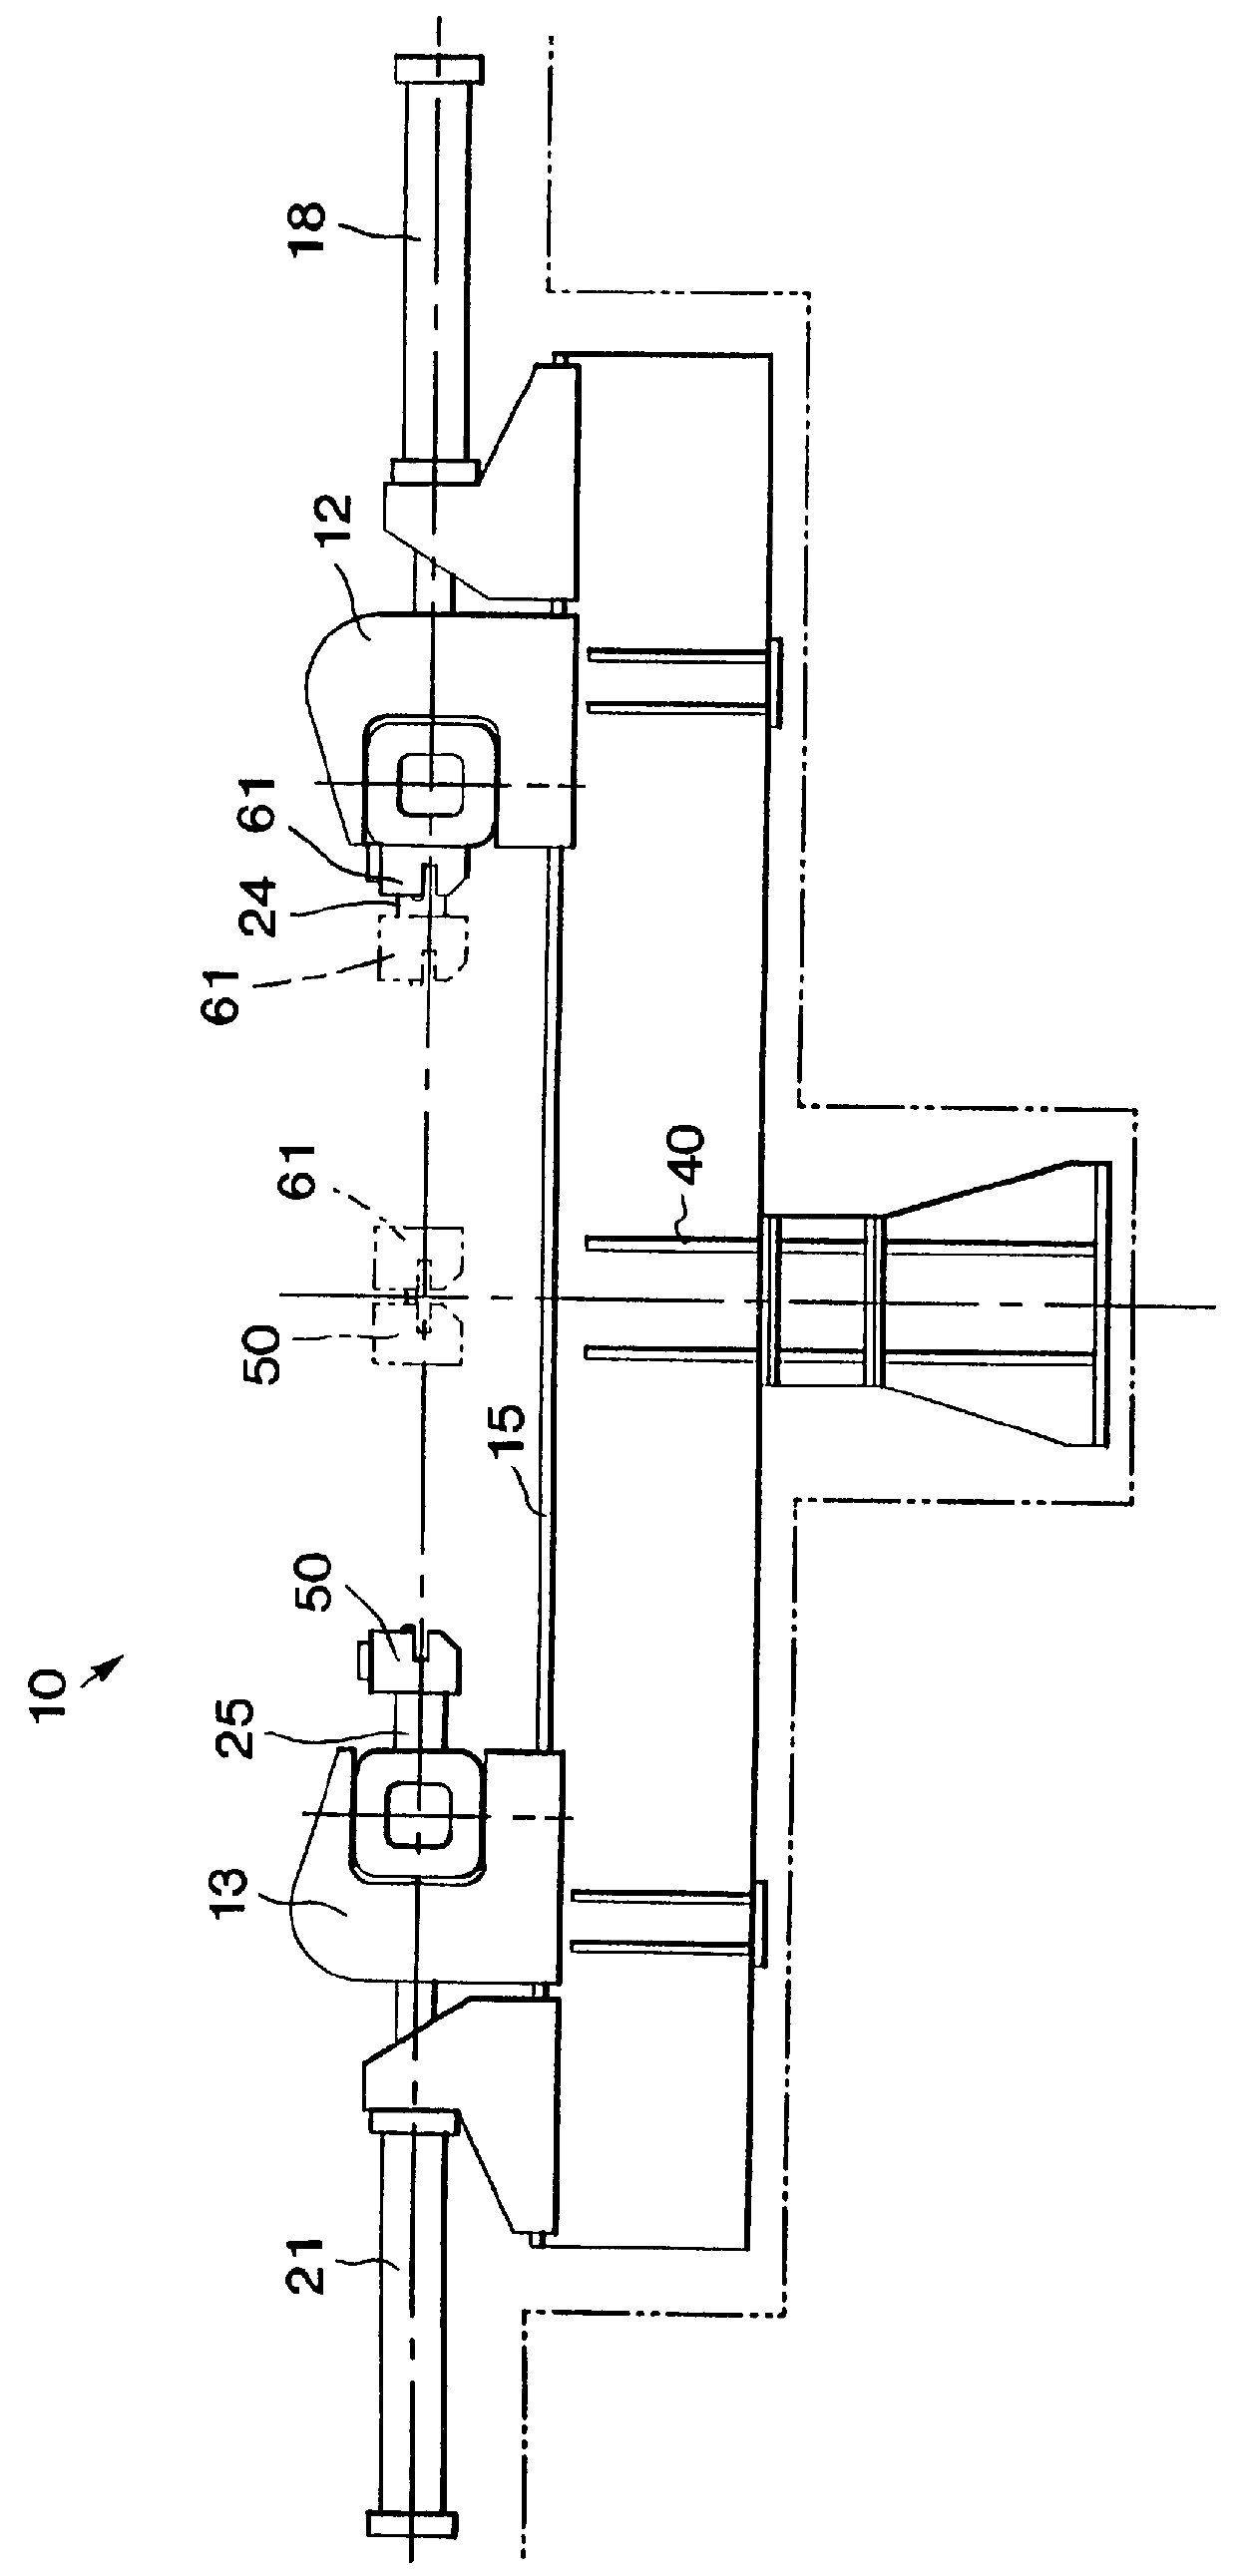 Stretch-forming machine with servo-controlled curving jaws